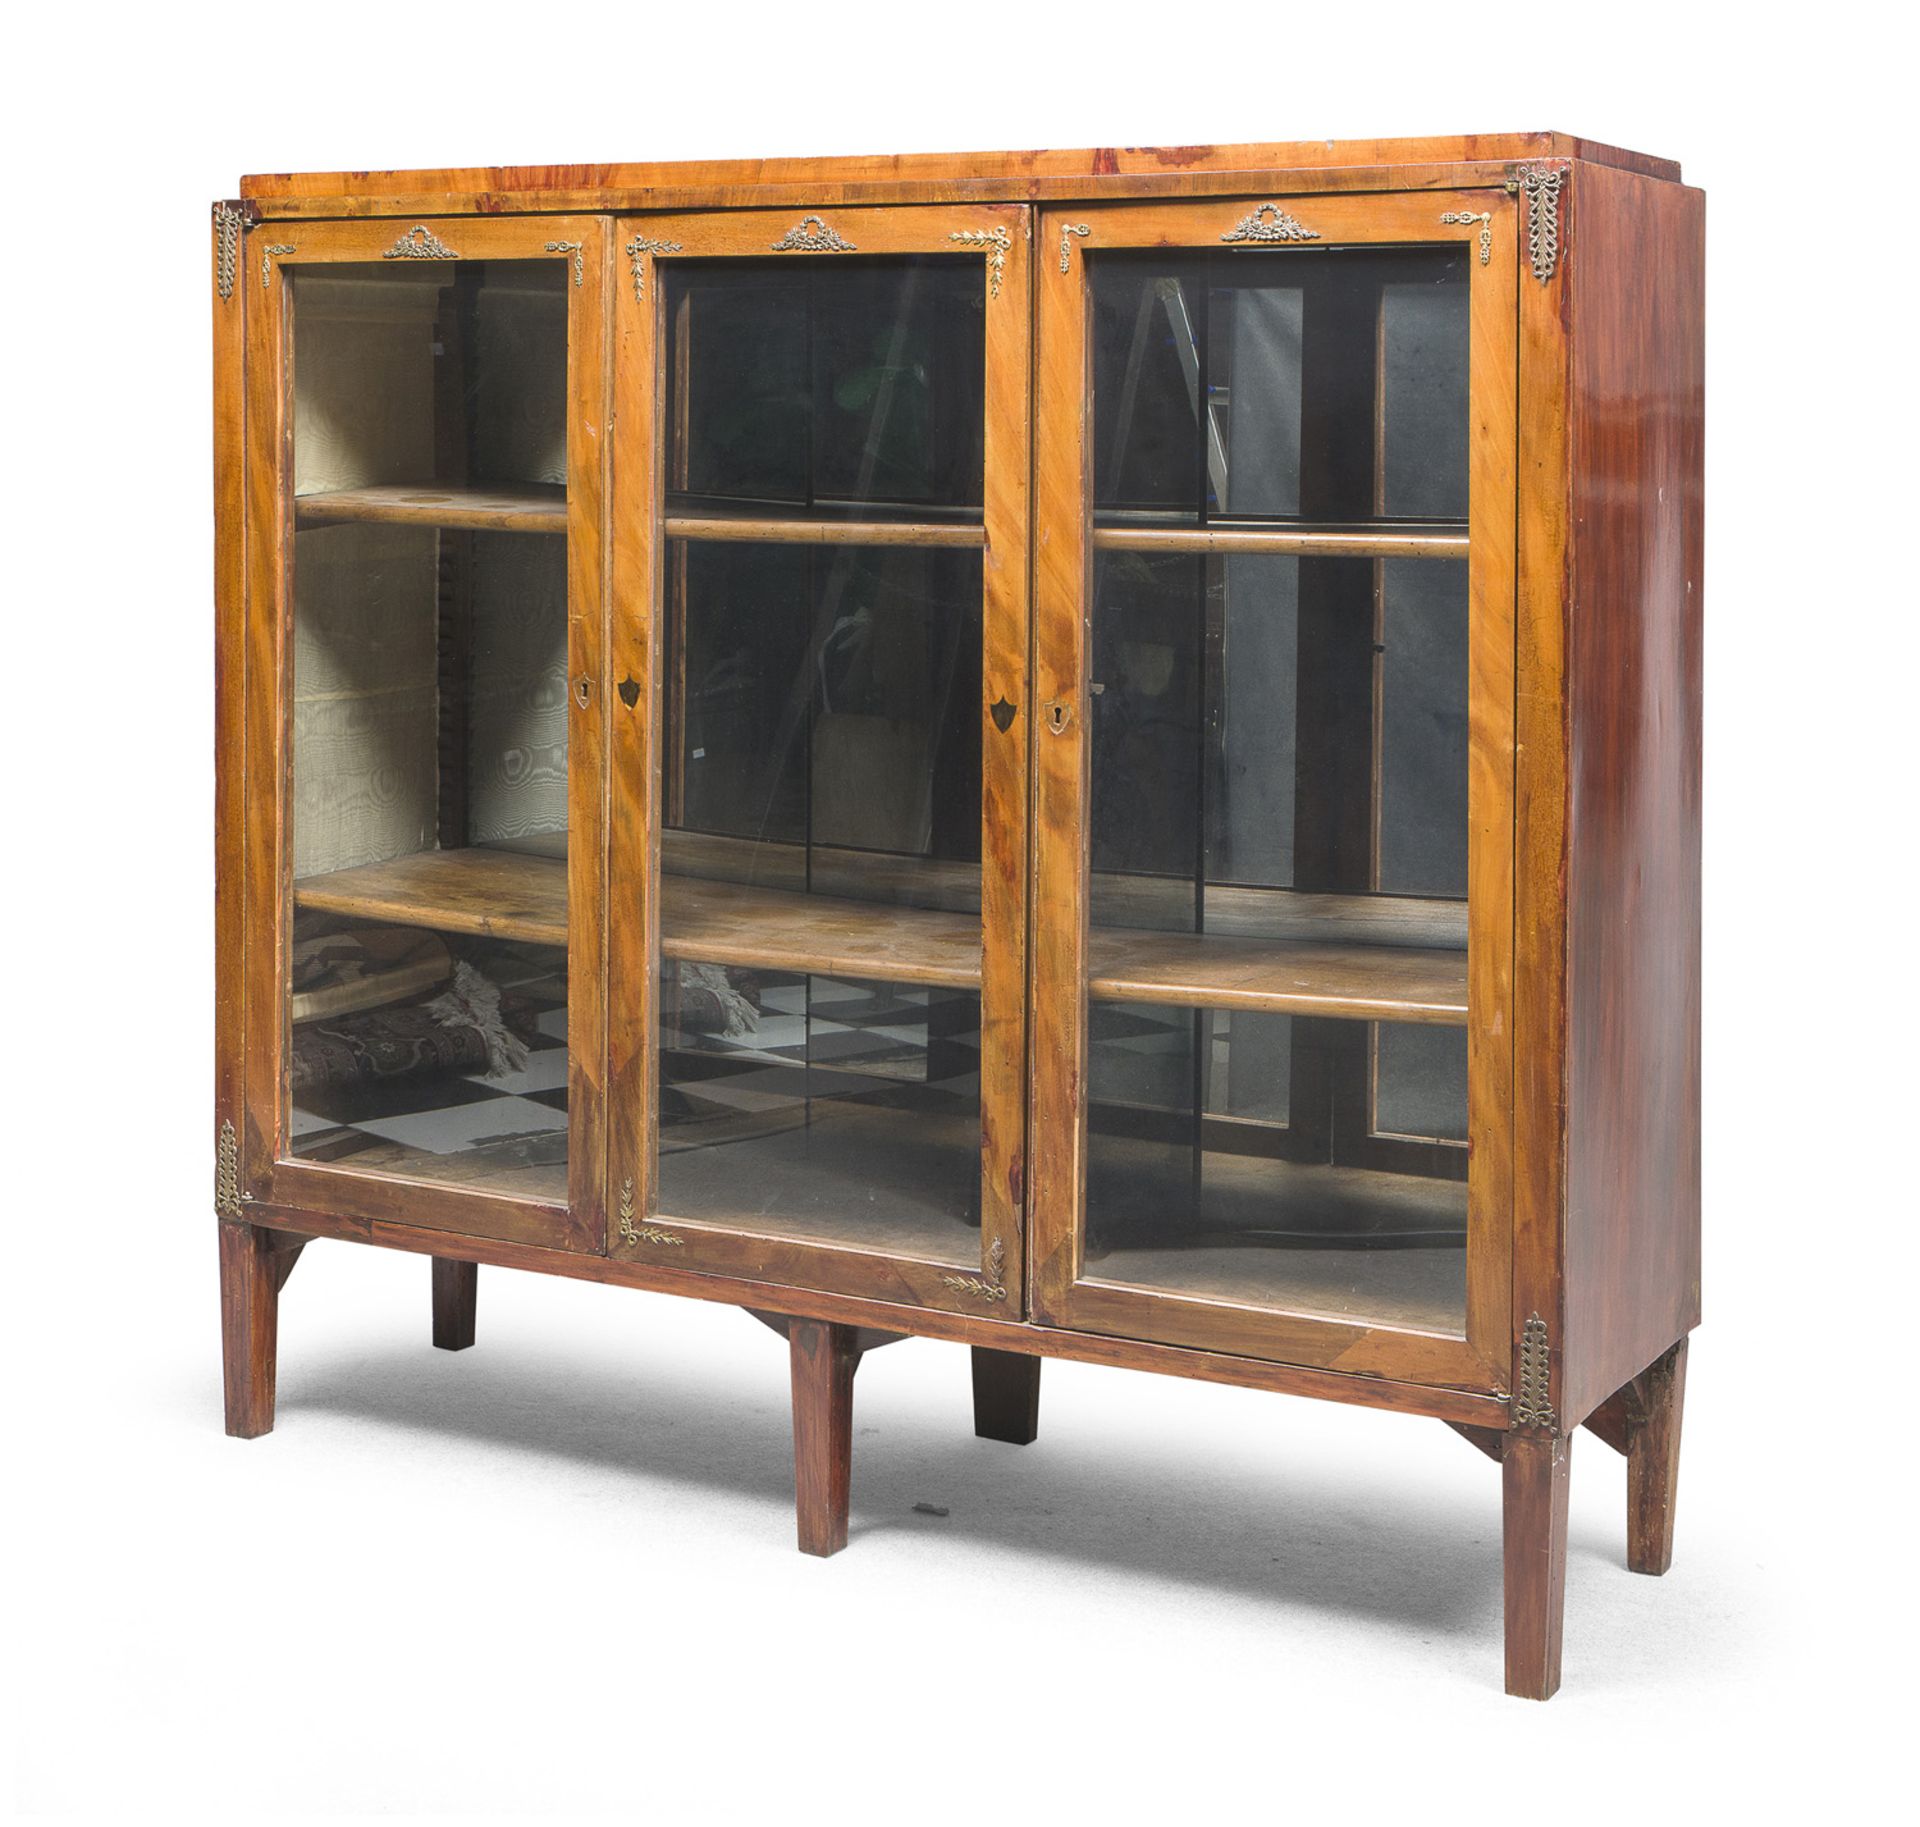 CHERRY BOOKCASE WITH GLASS DOORS TUSCANY EARLY 19TH CENTURY